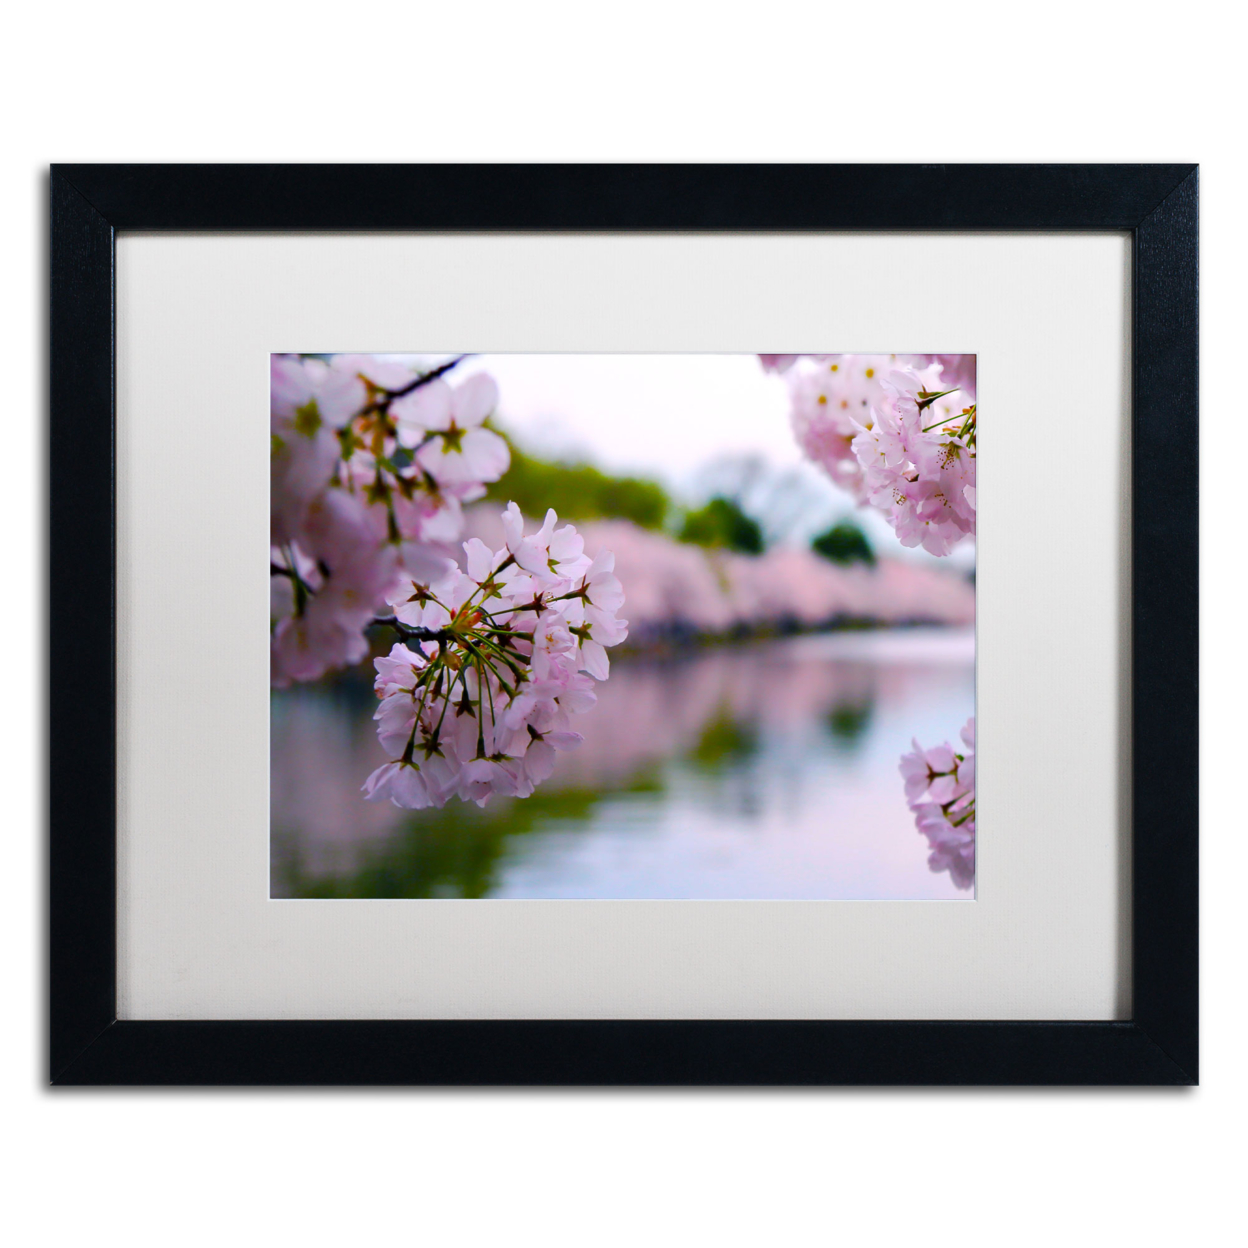 CATeyes 'Cherry Blossoms 2014-2' Black Wooden Framed Art 18 X 22 Inches